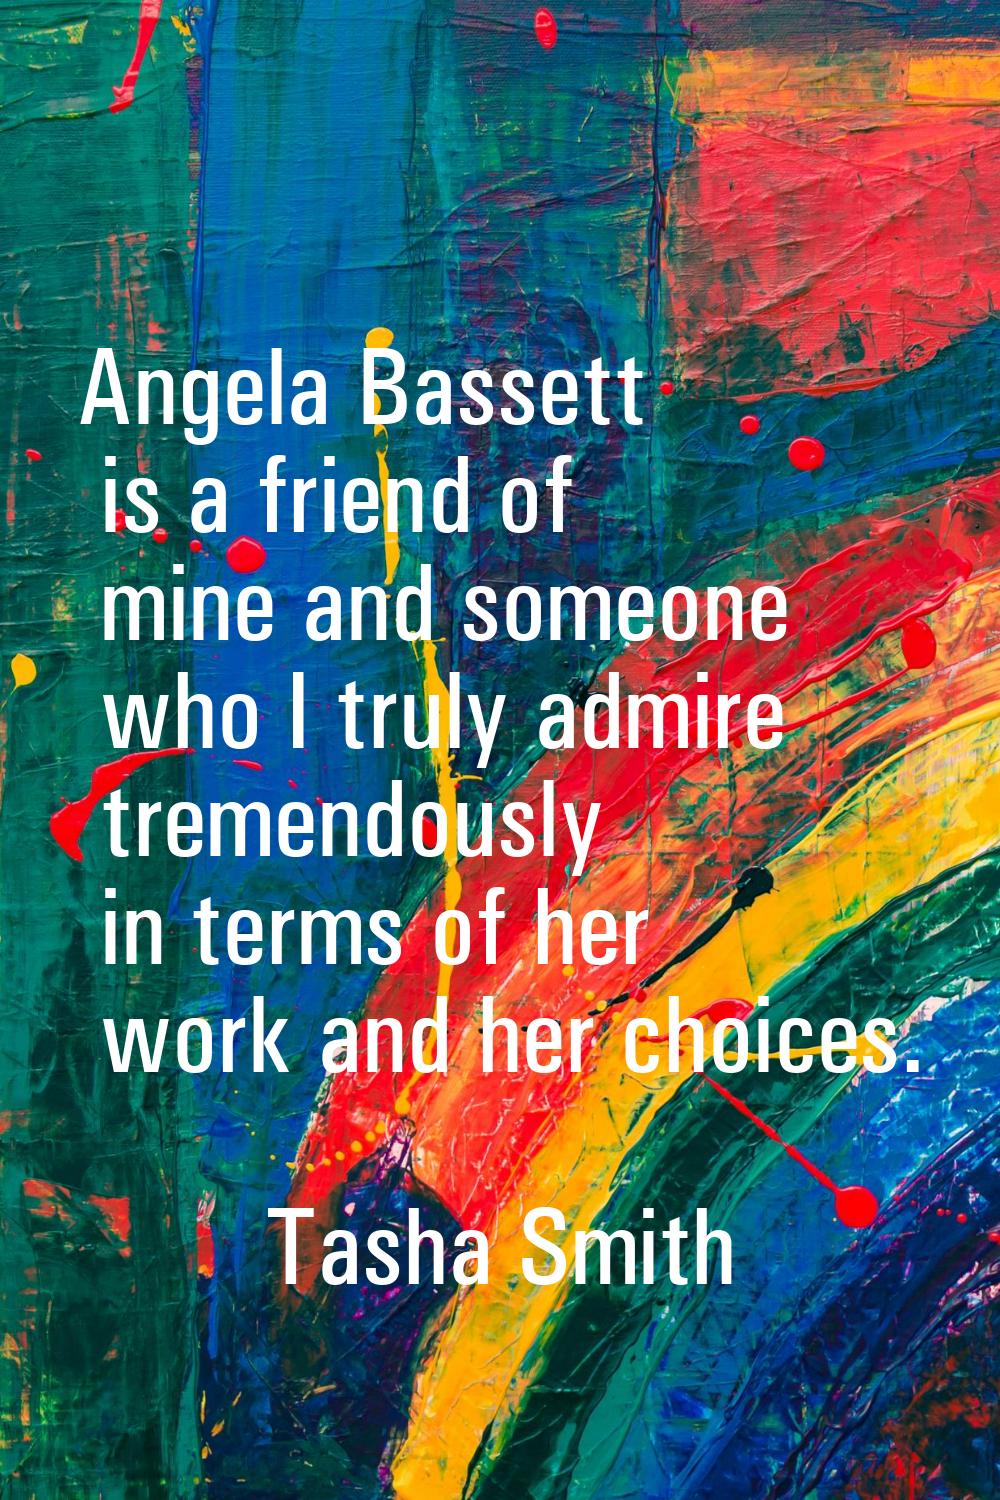 Angela Bassett is a friend of mine and someone who I truly admire tremendously in terms of her work